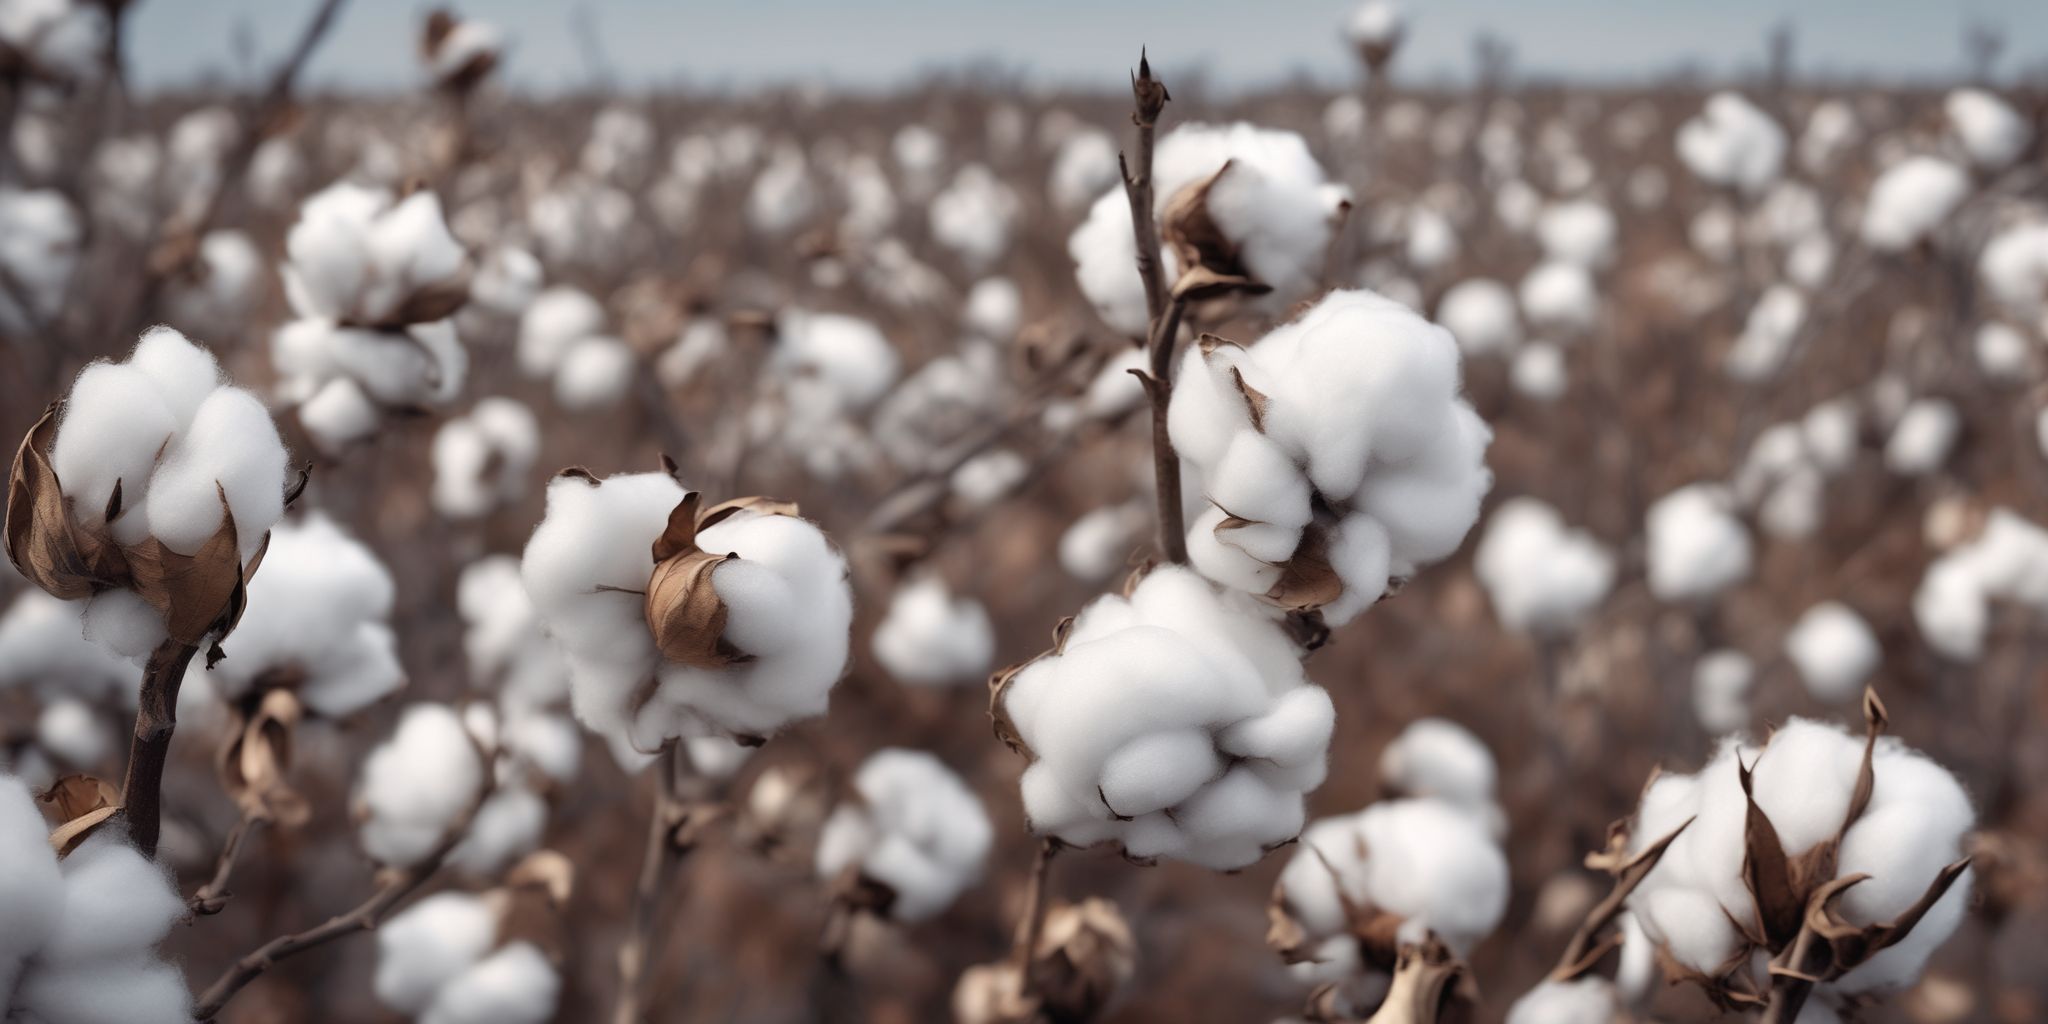 Cotton  in realistic, photographic style